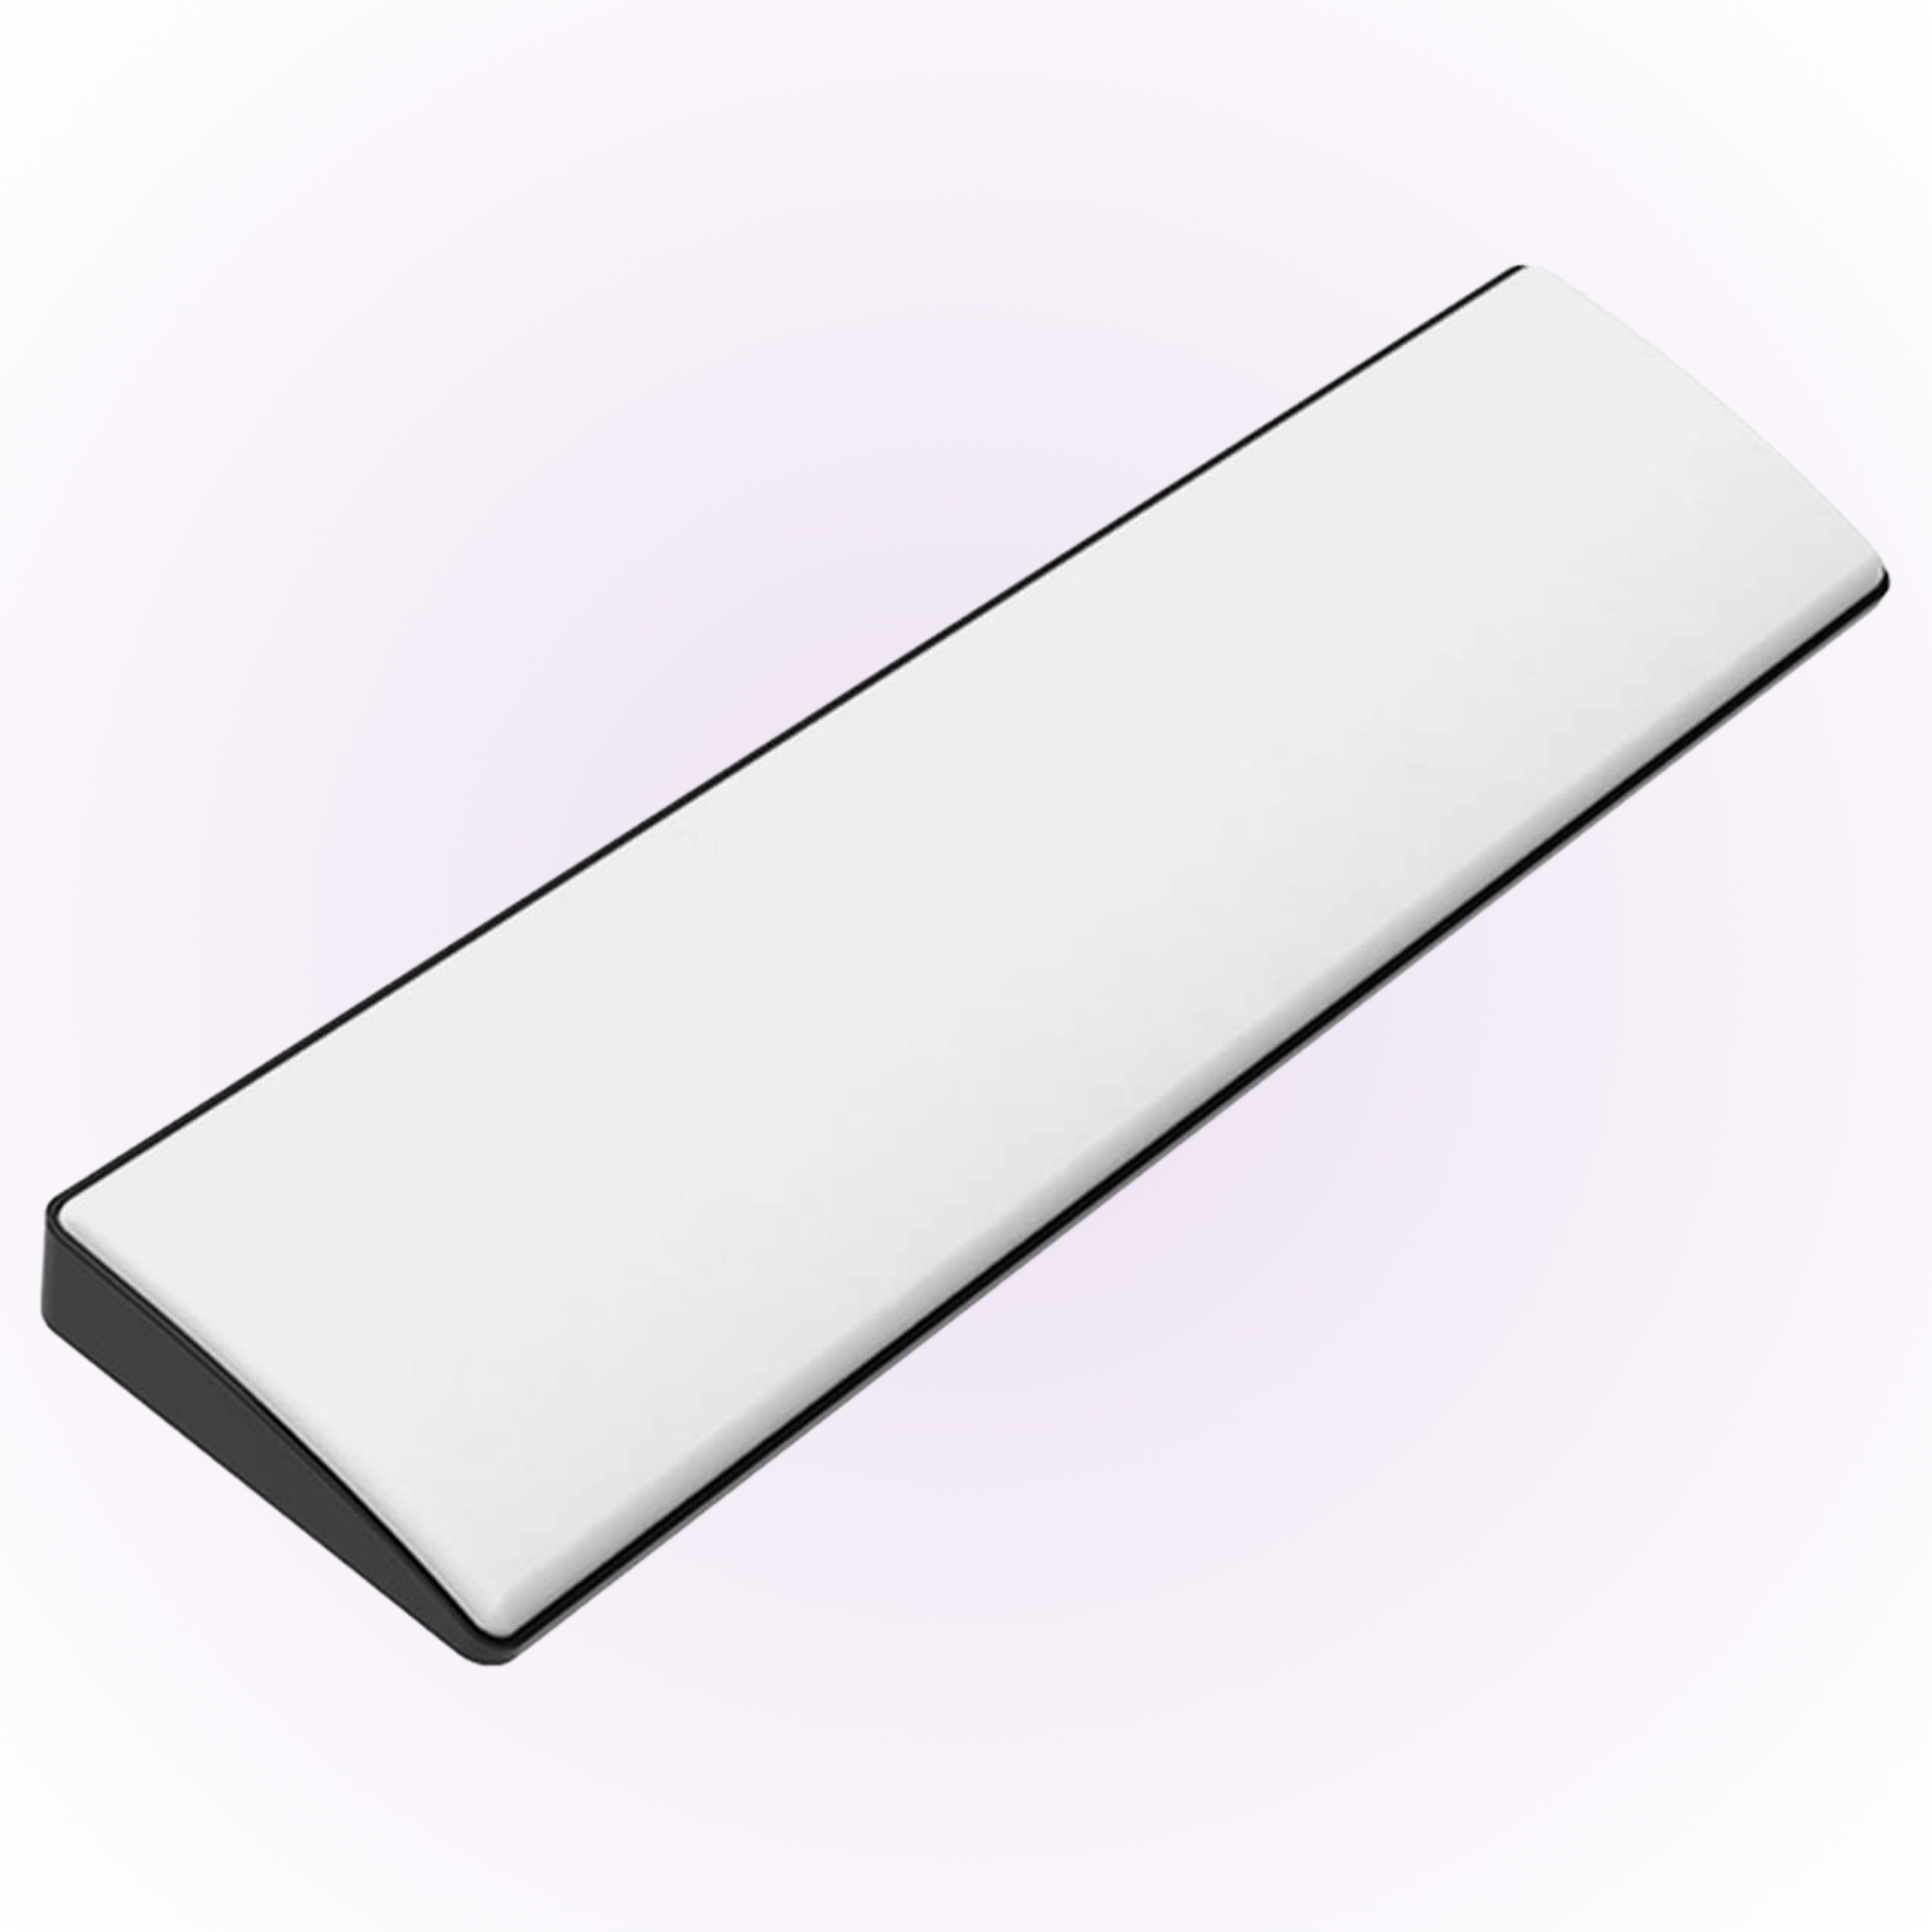 angled white wrist rest with a black base